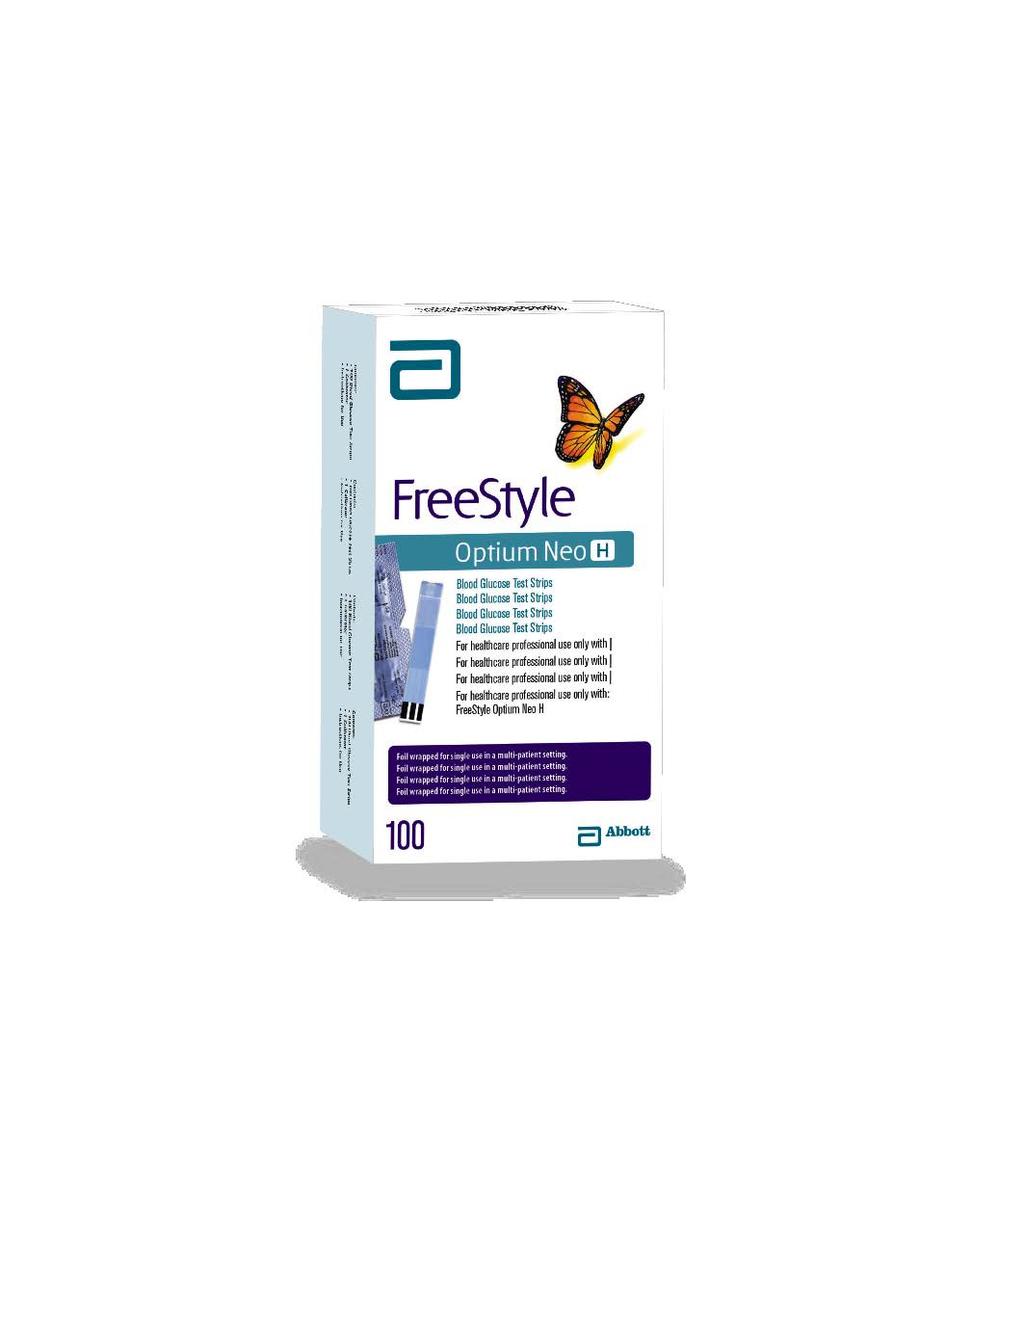 The FreeStyle OpAum Neo H Blood Glucose Test Strip The FreeStyle OpAum Neo H meter is designed to be used only with FreeStyle OpAum Neo H Blood Glucose Test Strips. 0.